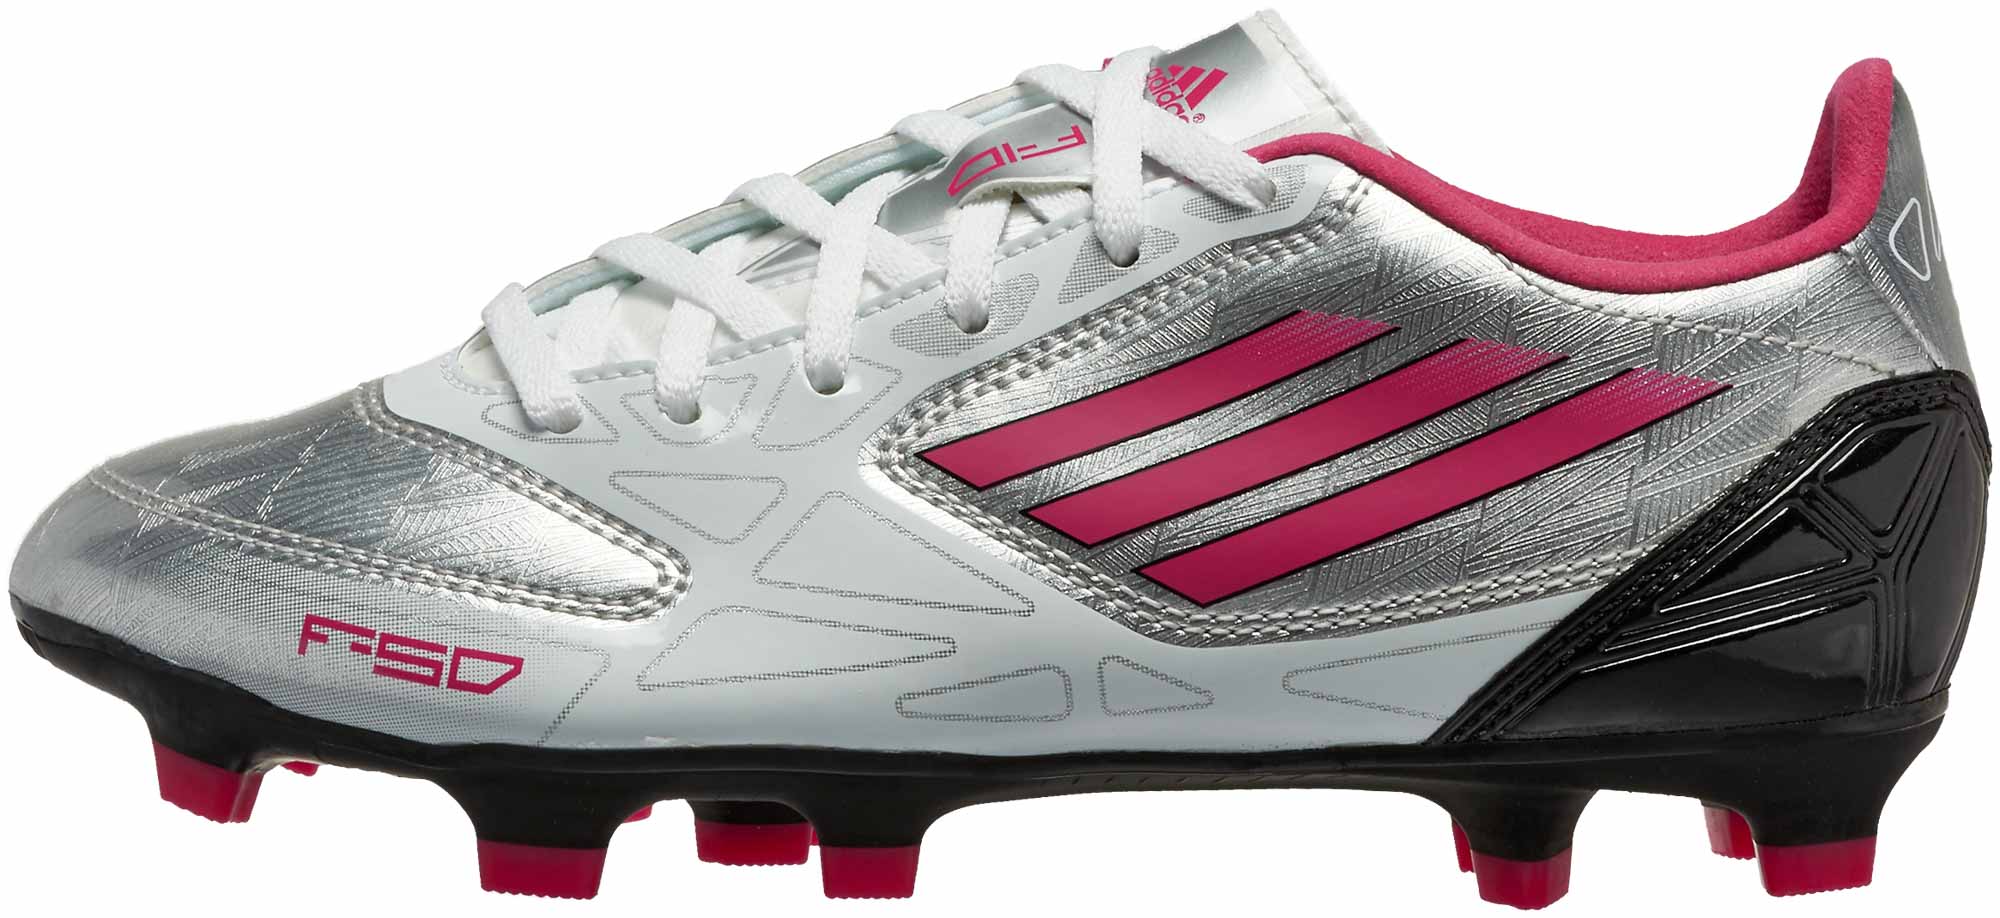 adidas pink cleats 2018